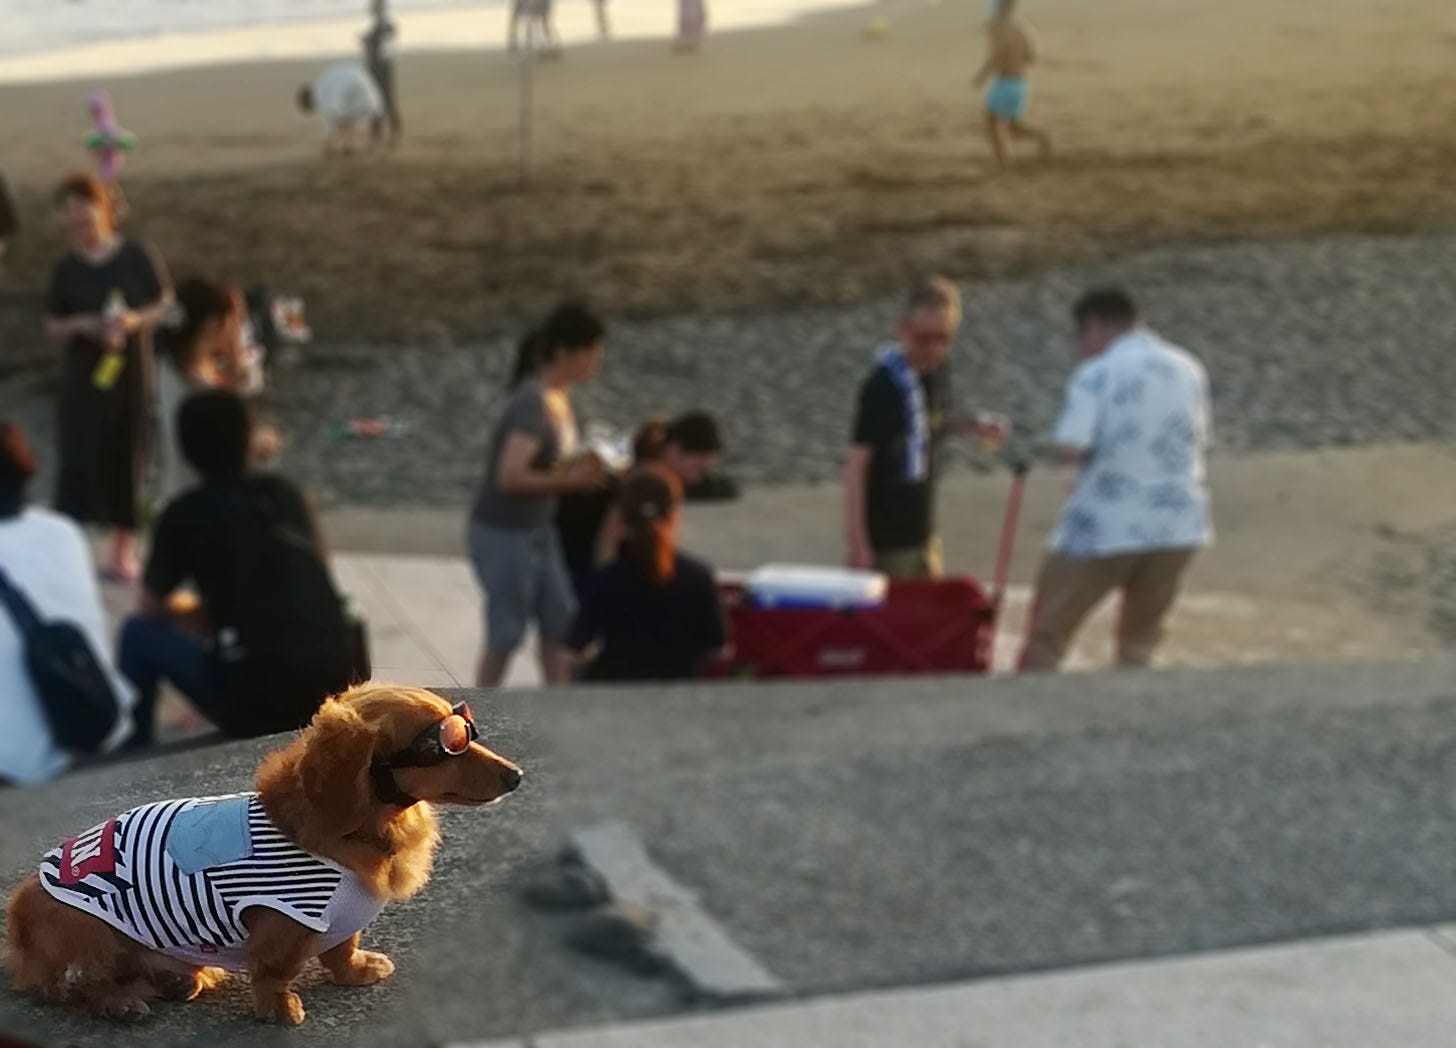 A dog at the beach wearing a striped shirt and sunglasses, blurred background